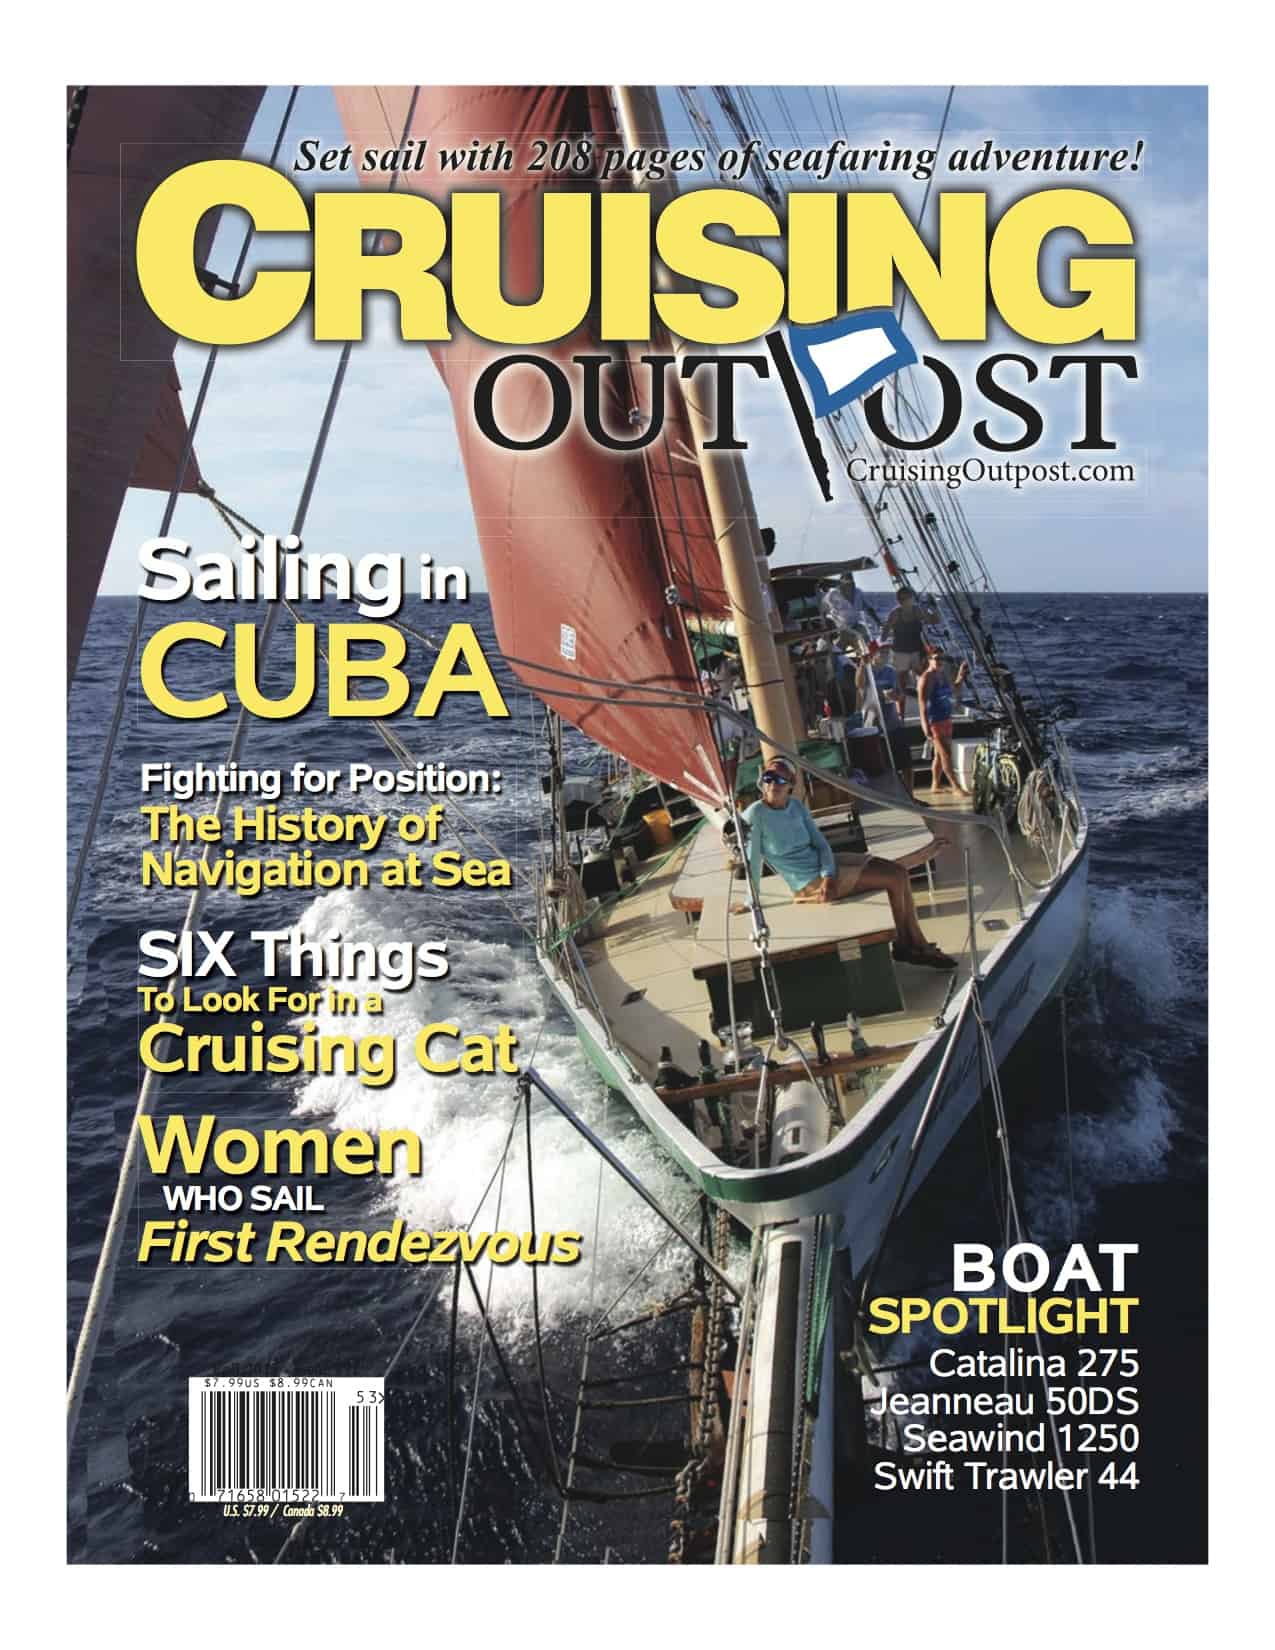 Cruising Outpost issue 12 includes article by catamaran guru about how to pick a cruising catamaran